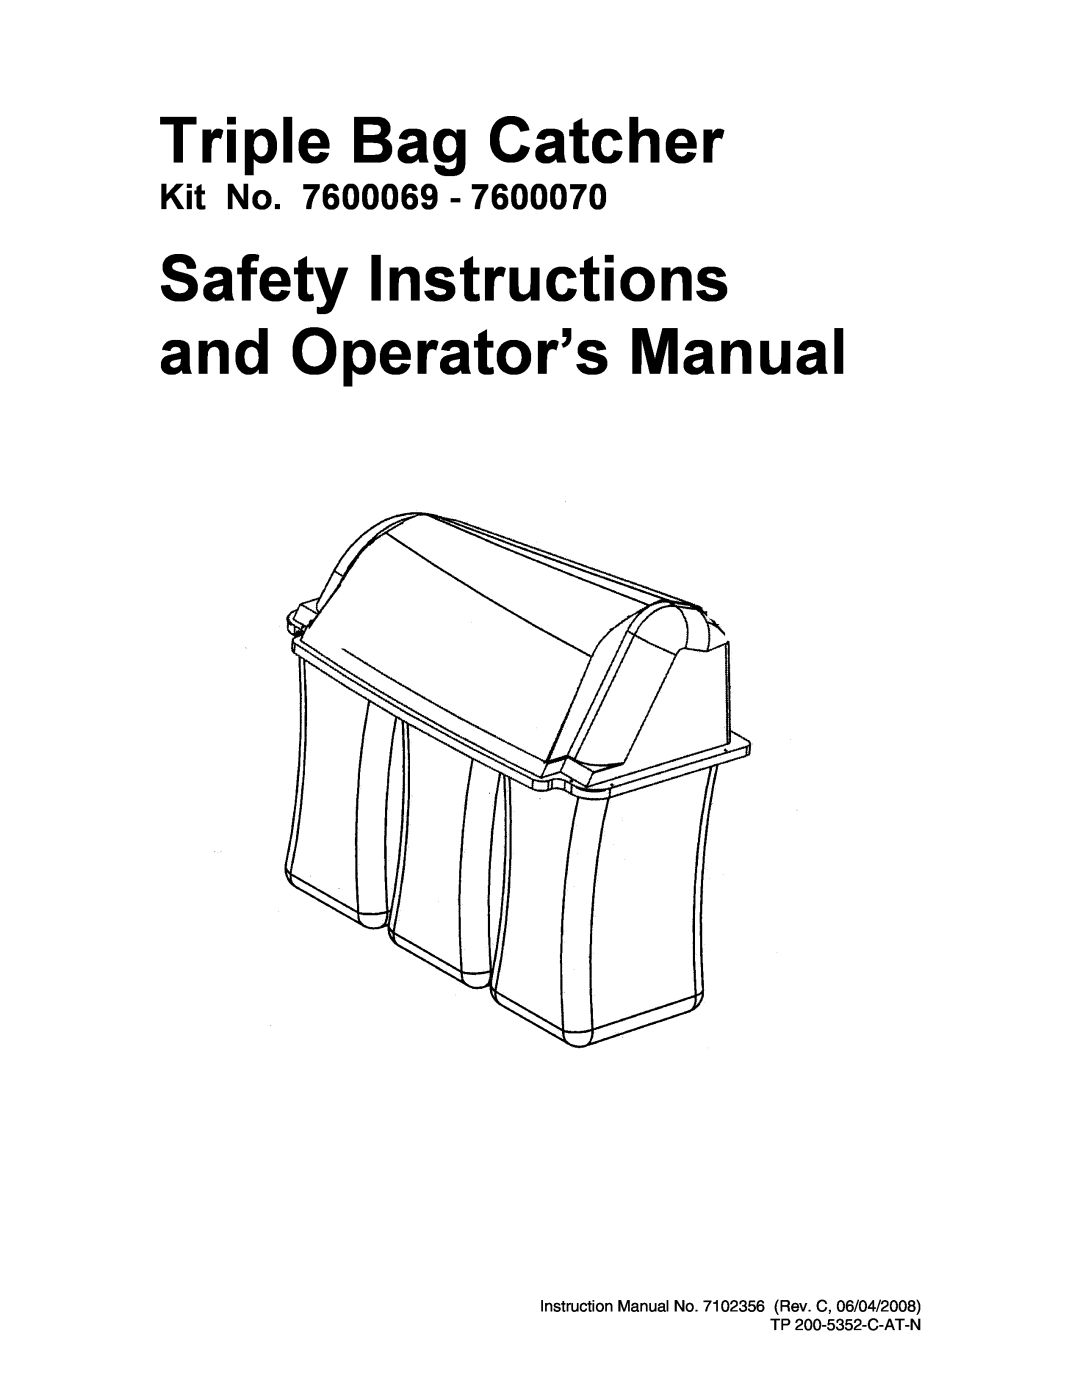 Snapper 7600069 - 7600070 instruction manual Triple Bag Catcher, Safety Instructions and Operator’s Manual, Kit No 